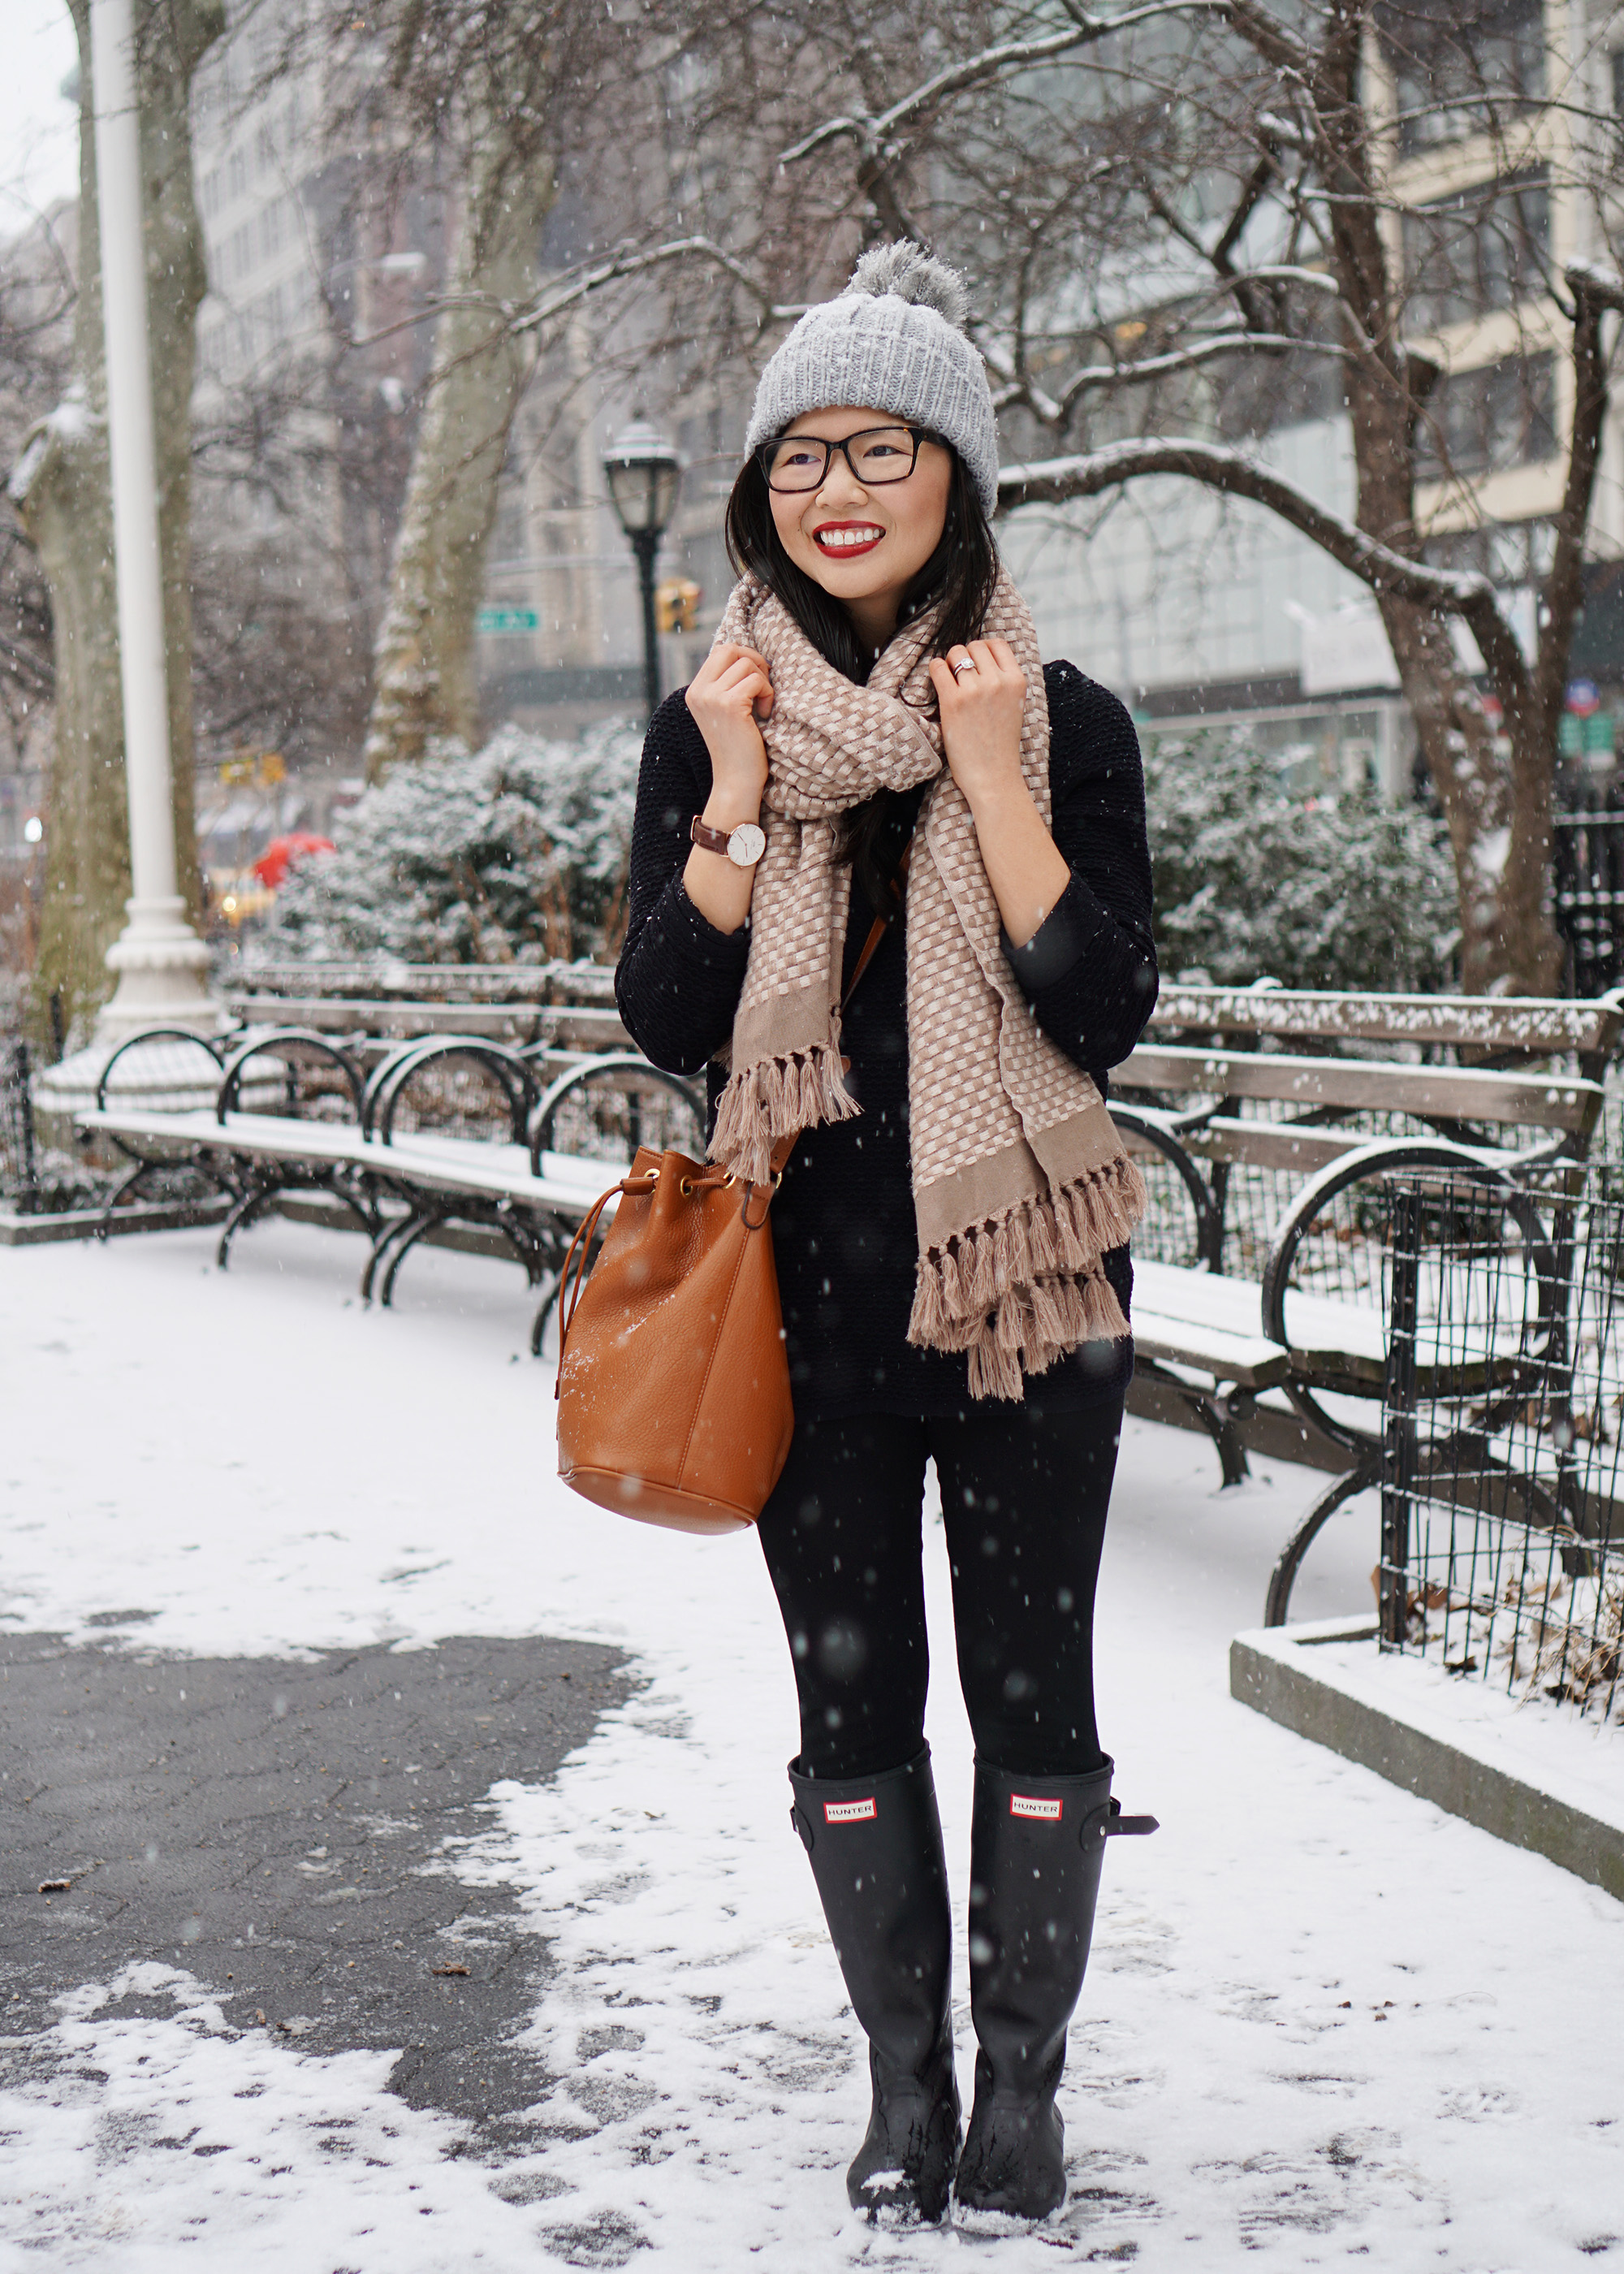 The Best Snow Day Outfit For Winter - My Style Vita